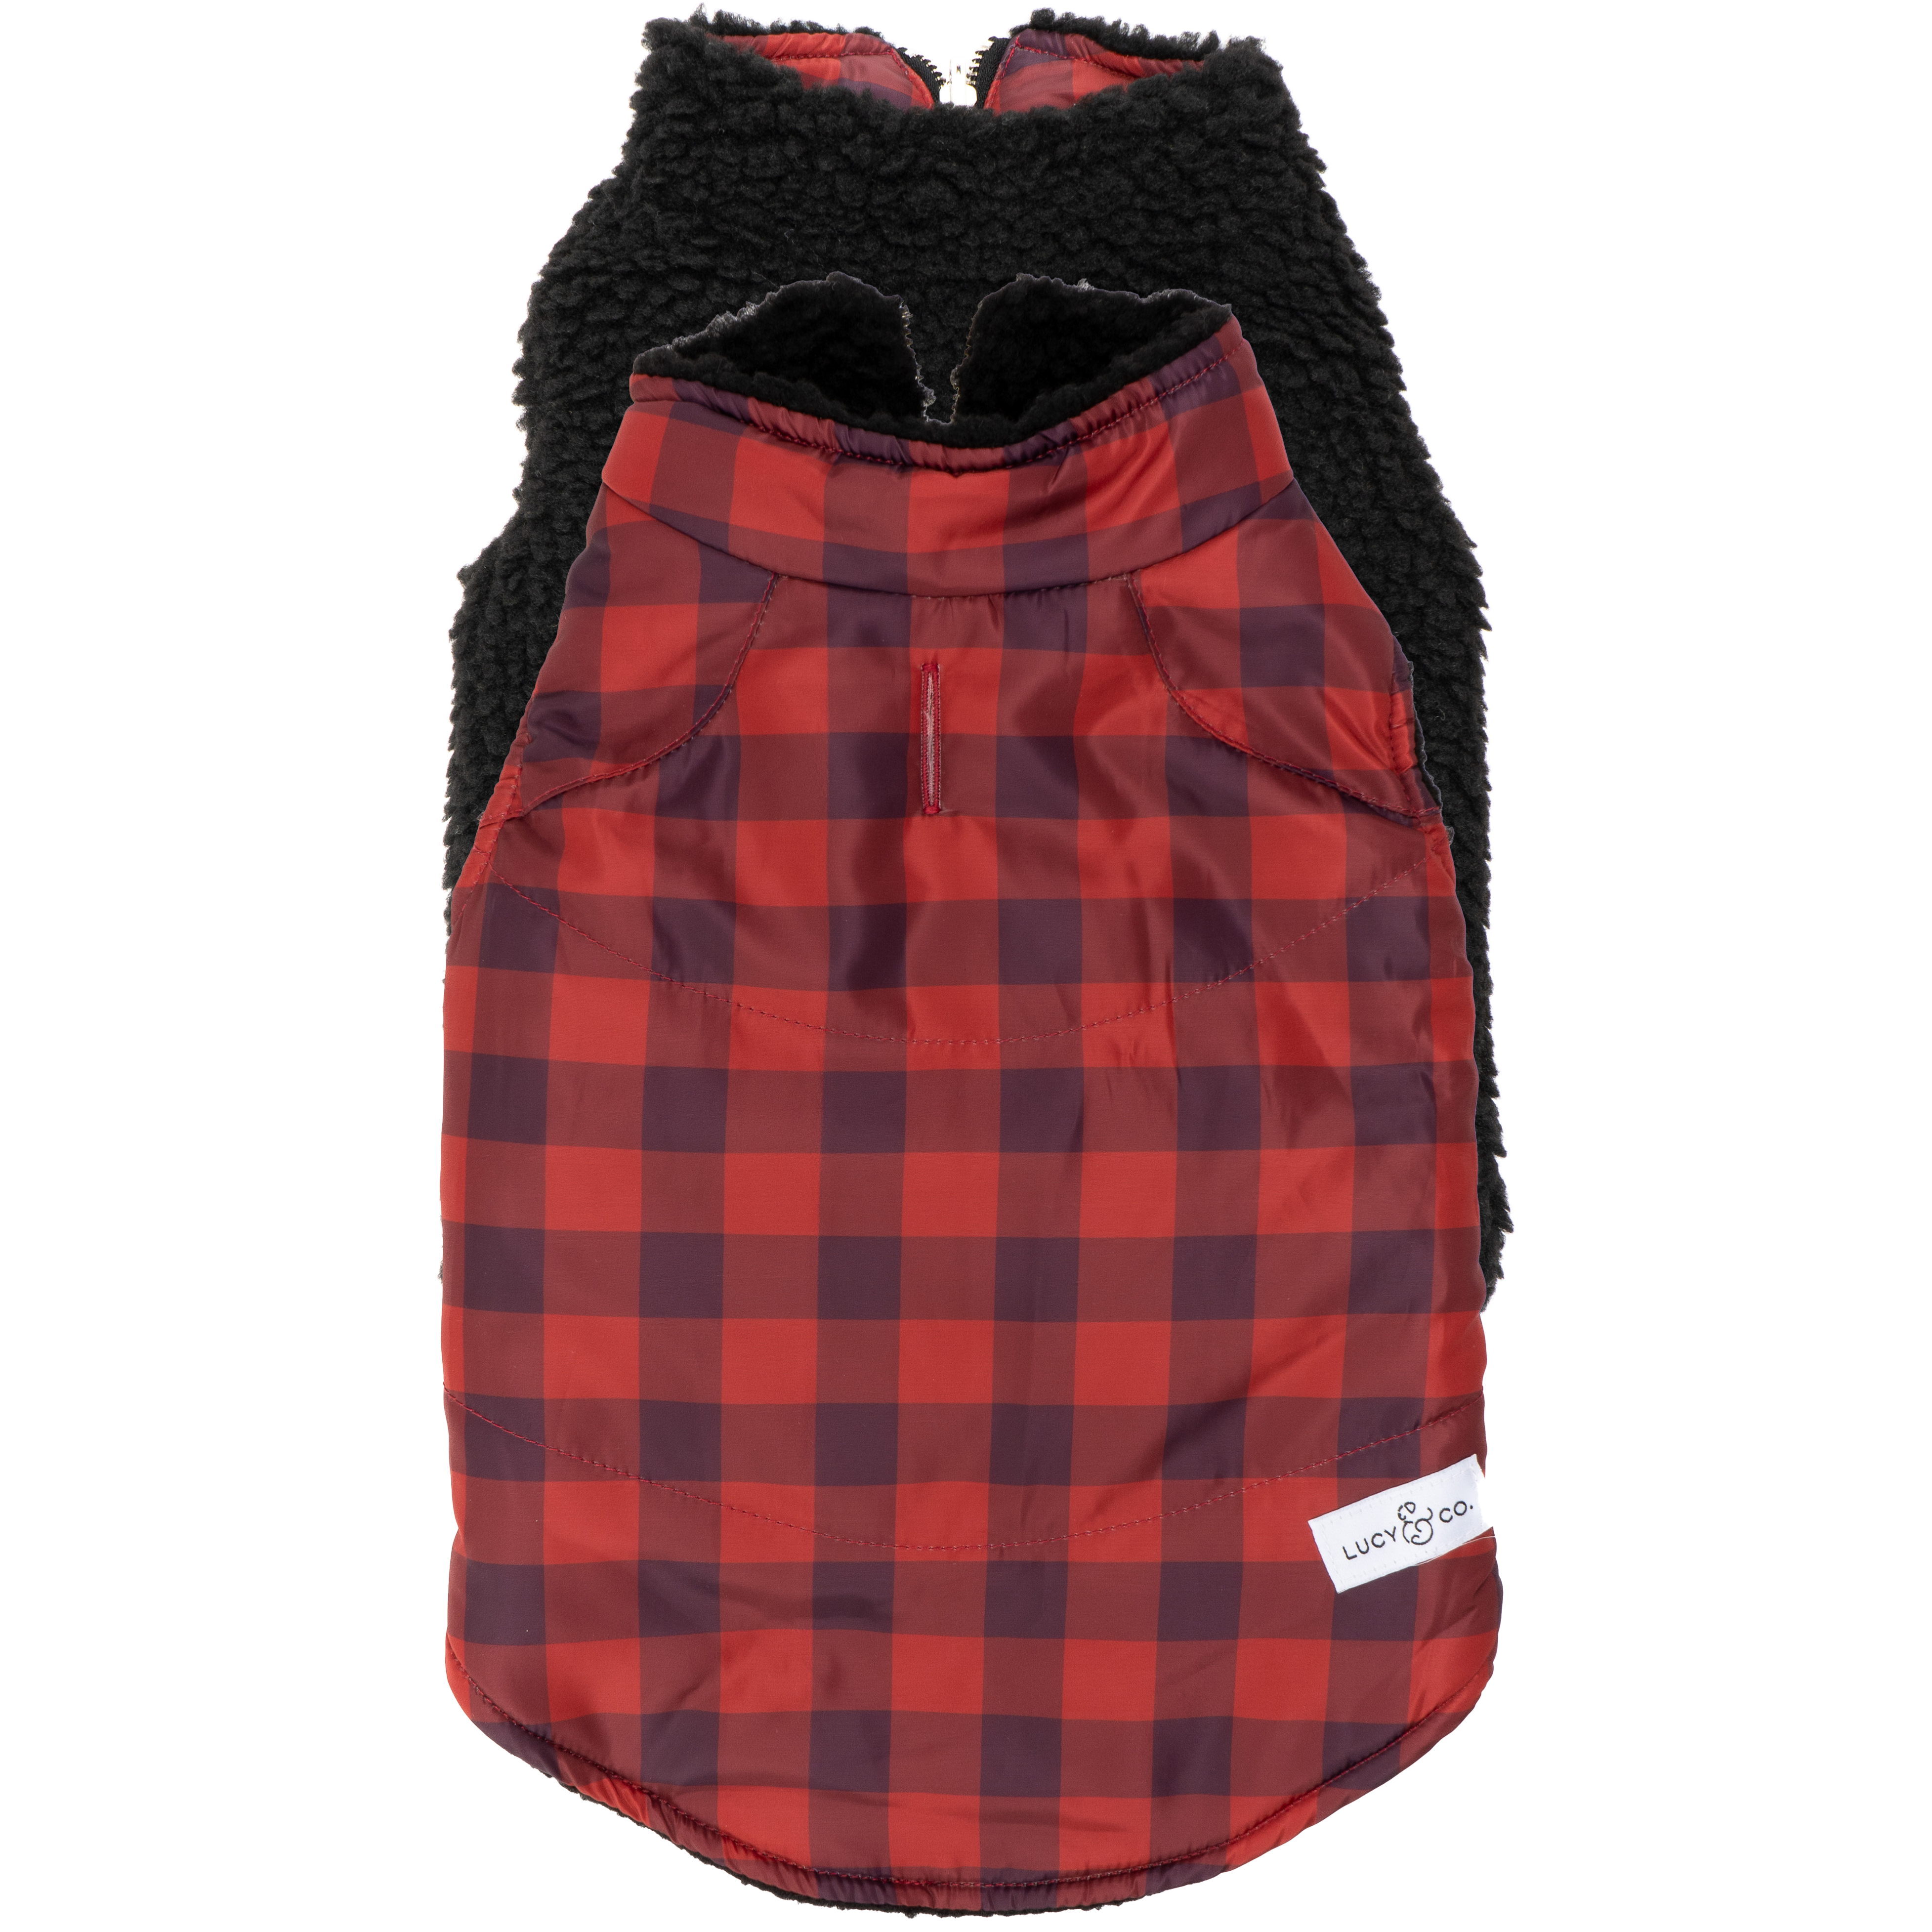 Lucy & Co. - The Holly Jolly Reversible Teddy Puffer Vest